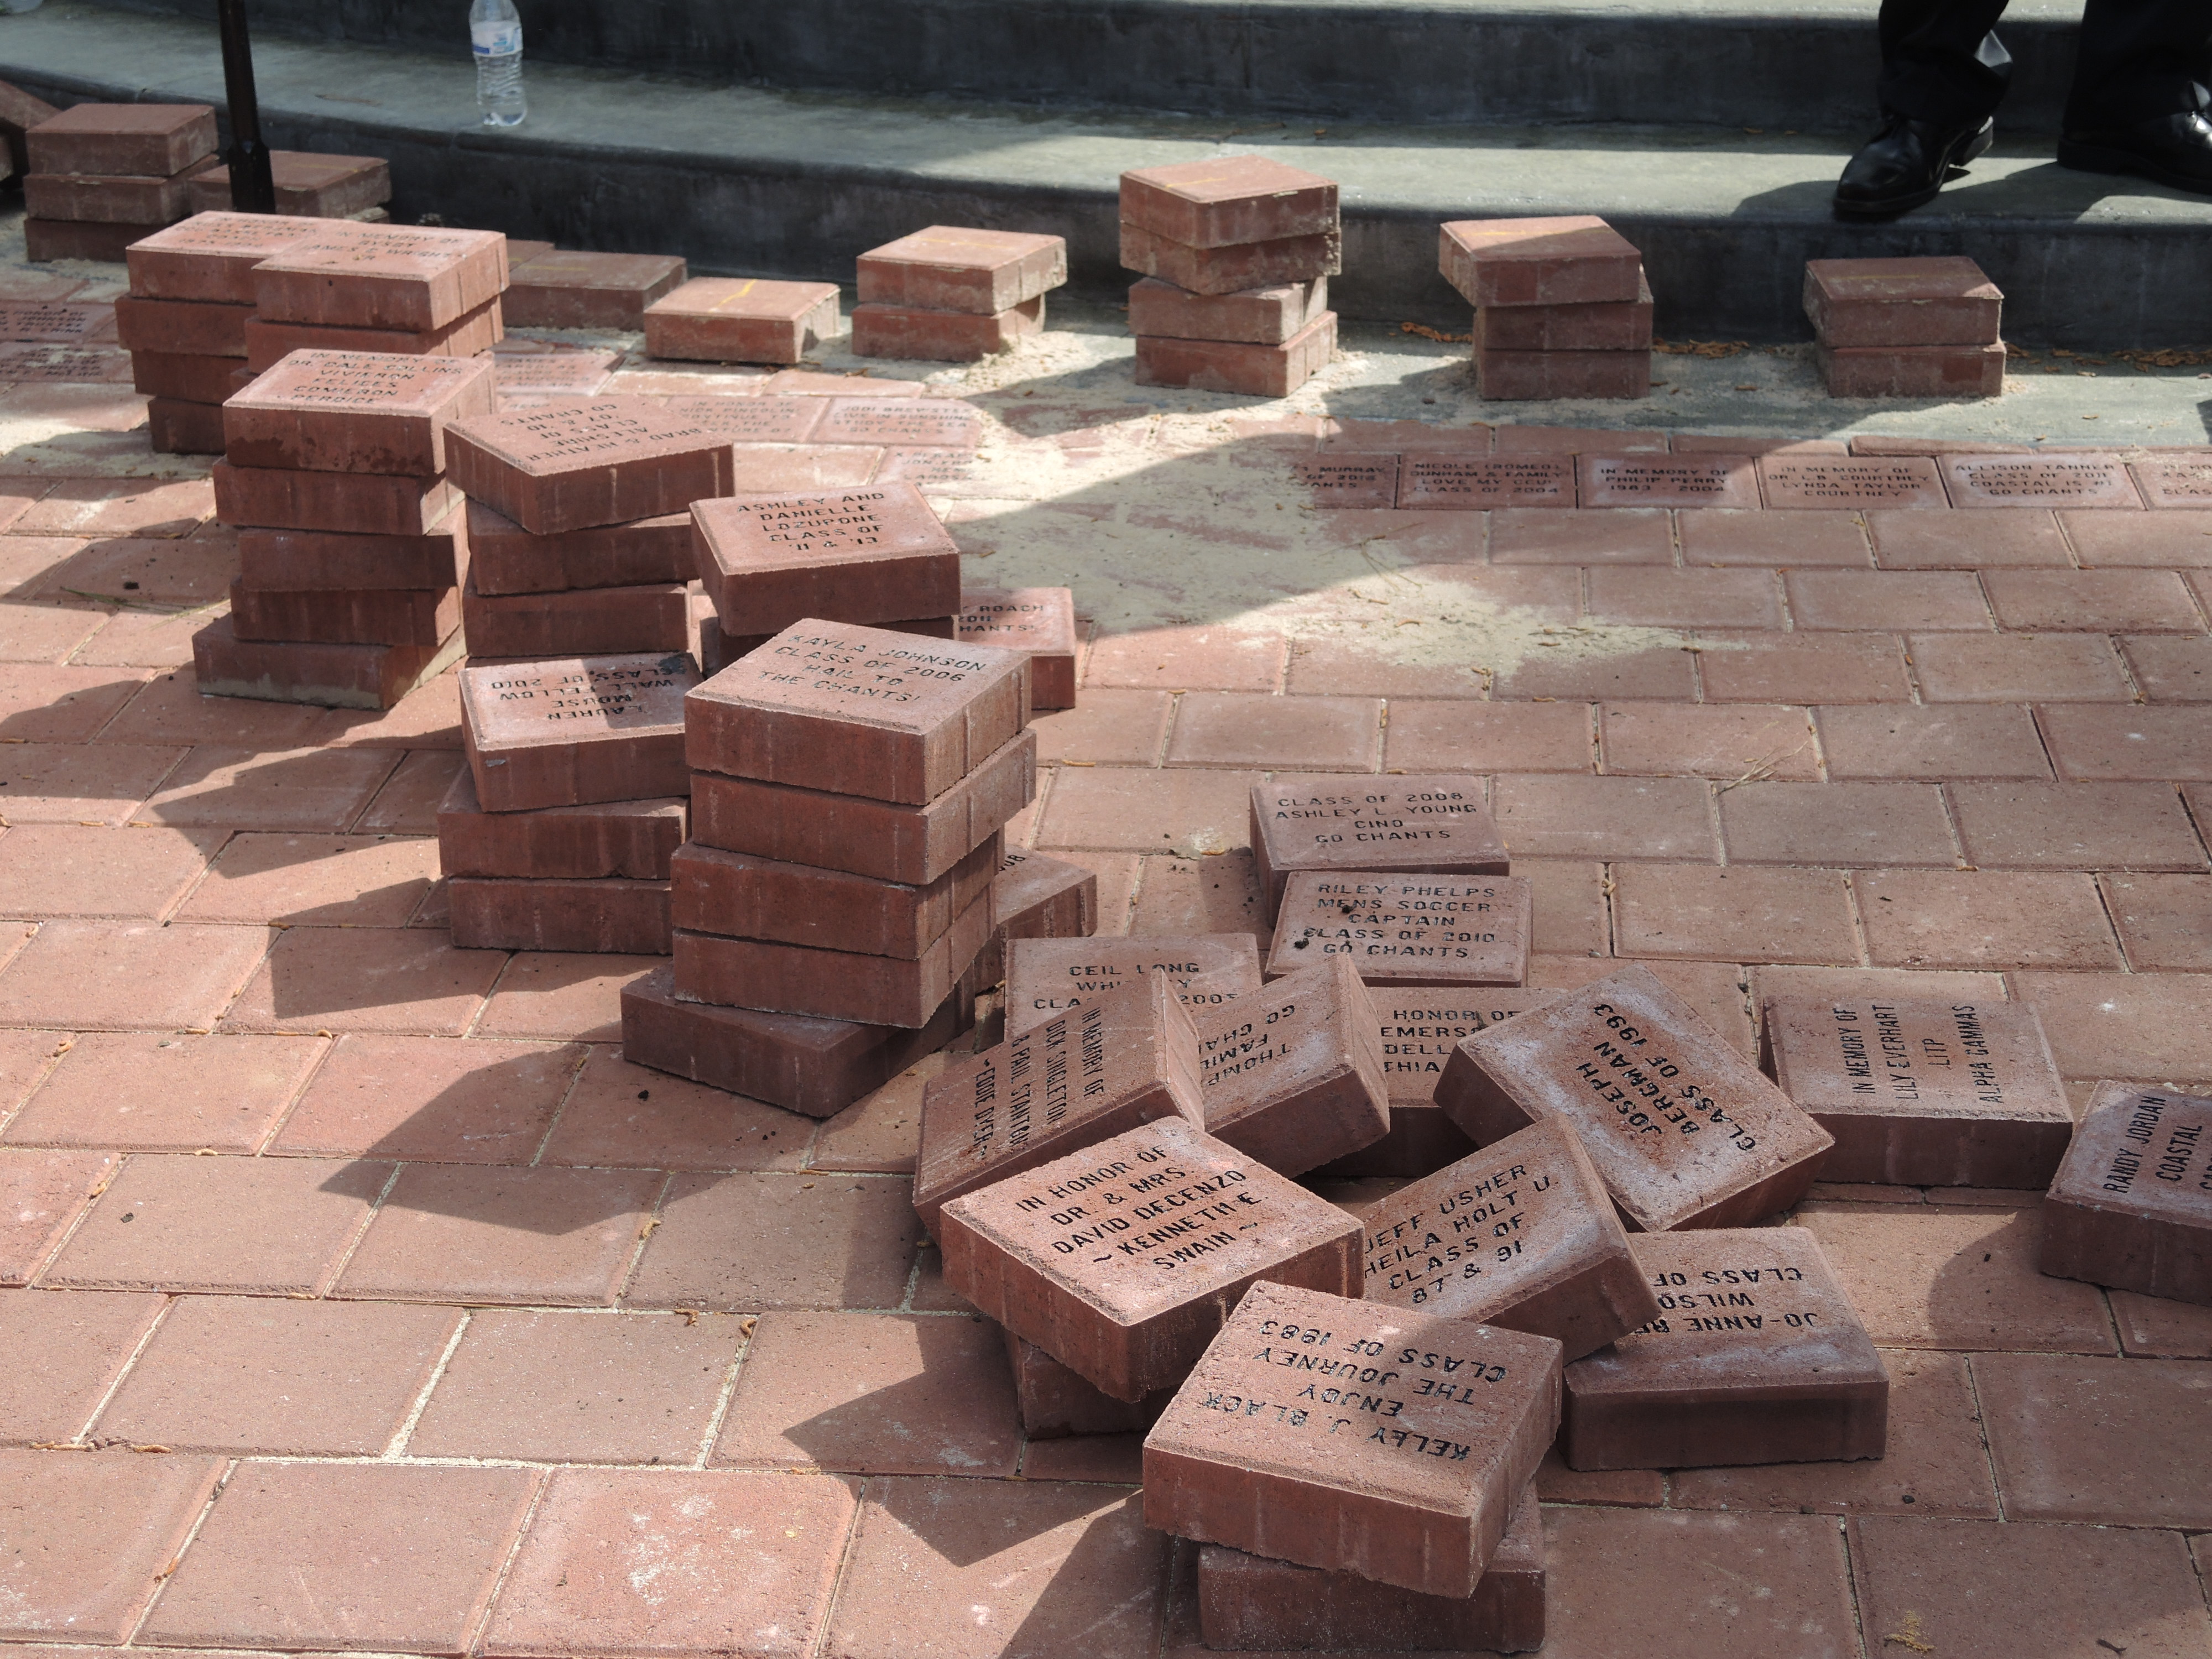 They installed the first wave of bricks this morning. (Photo courtesy of Jada Bynum).